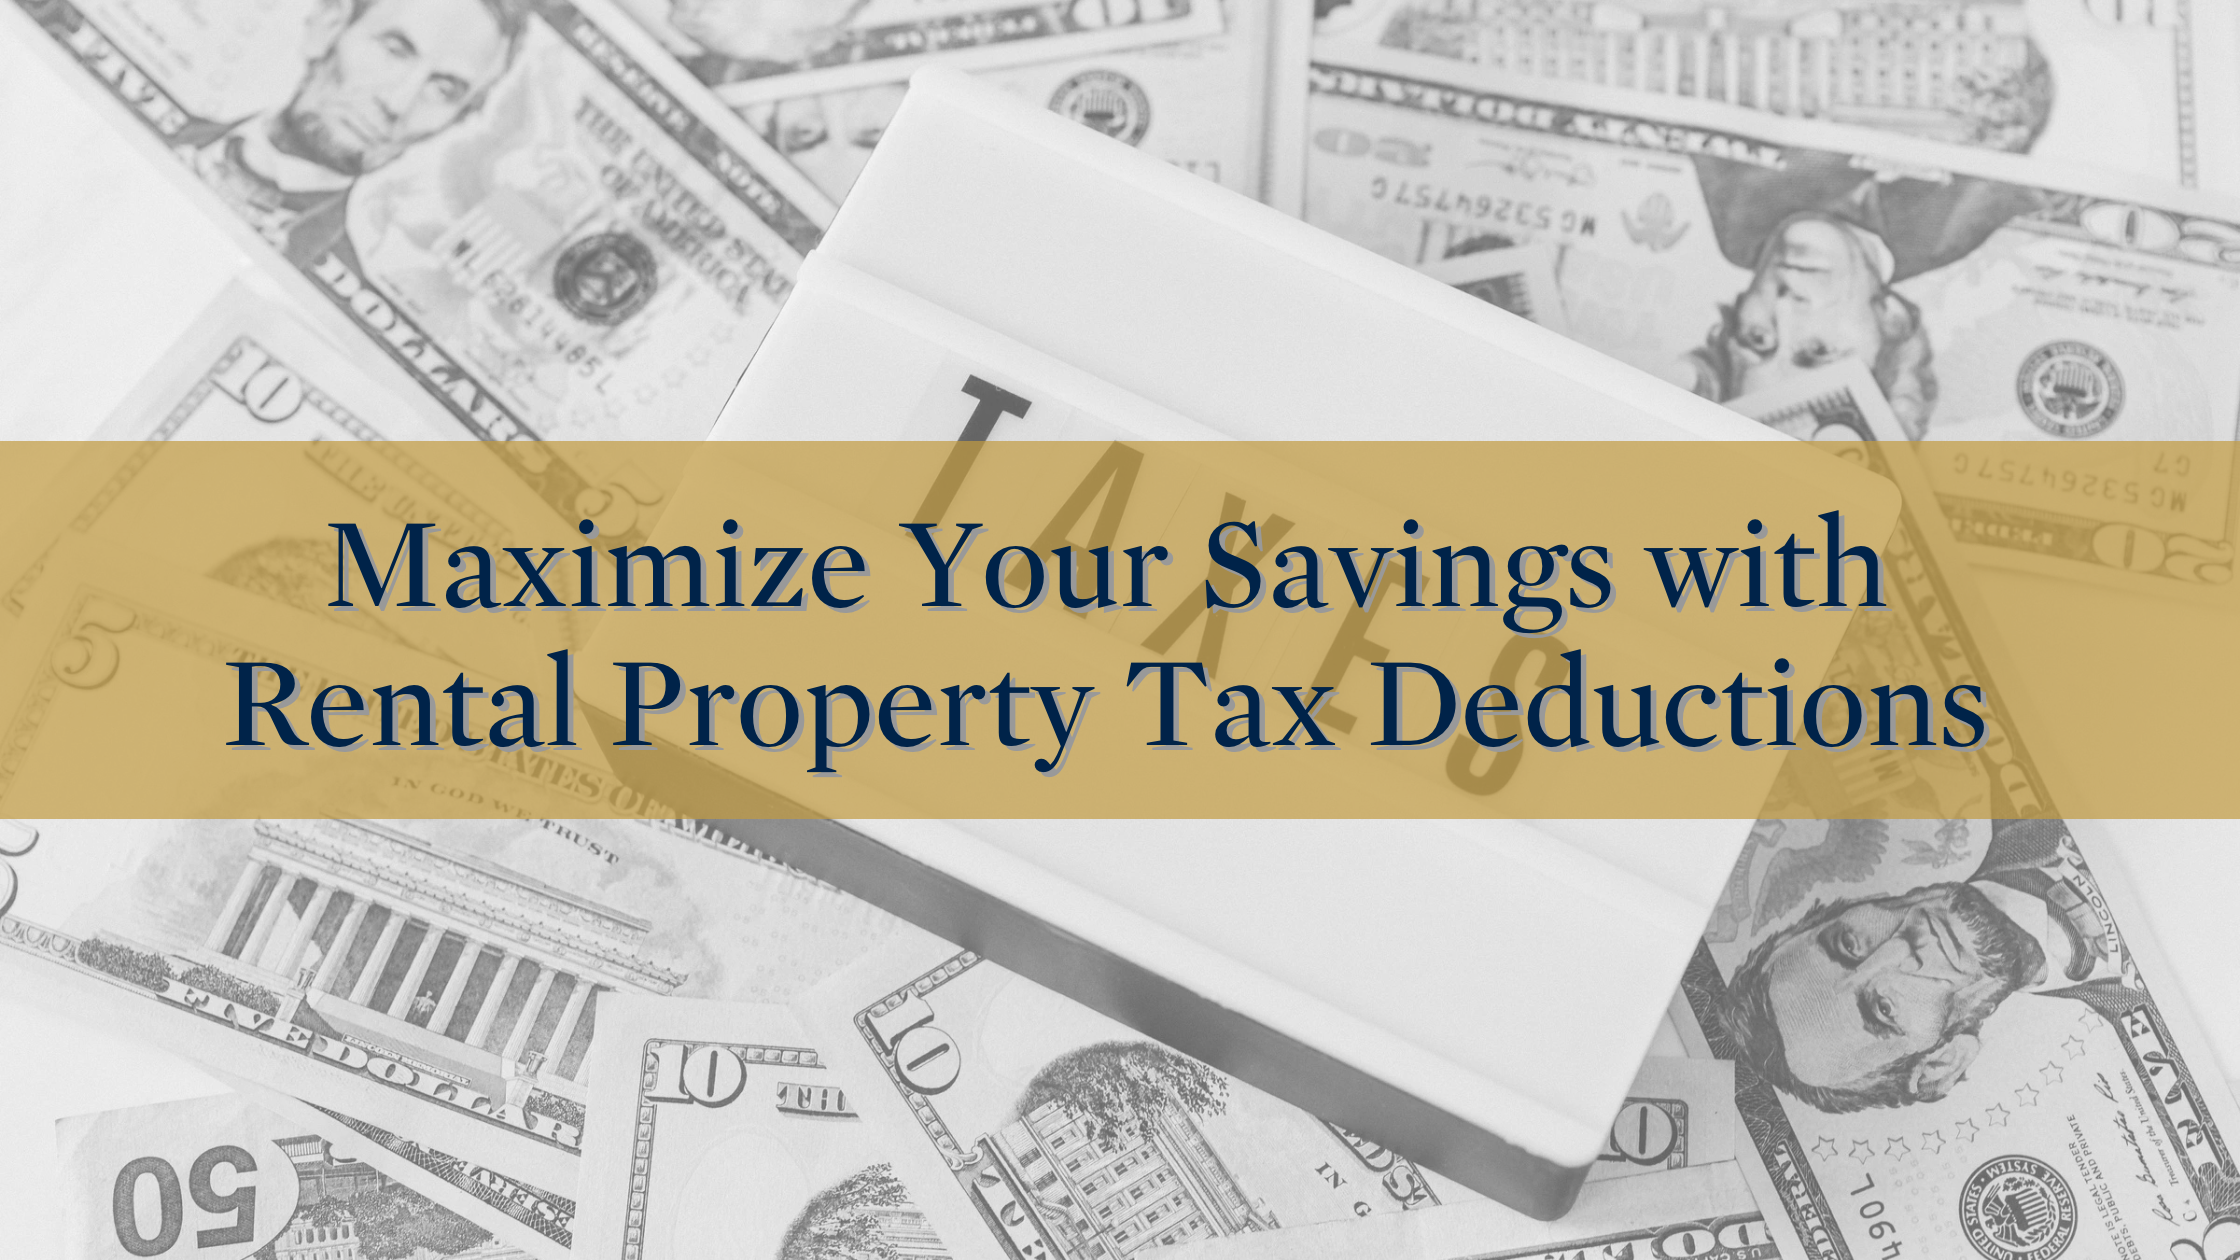 Maximize Your Savings with Rental Property Tax Deductions